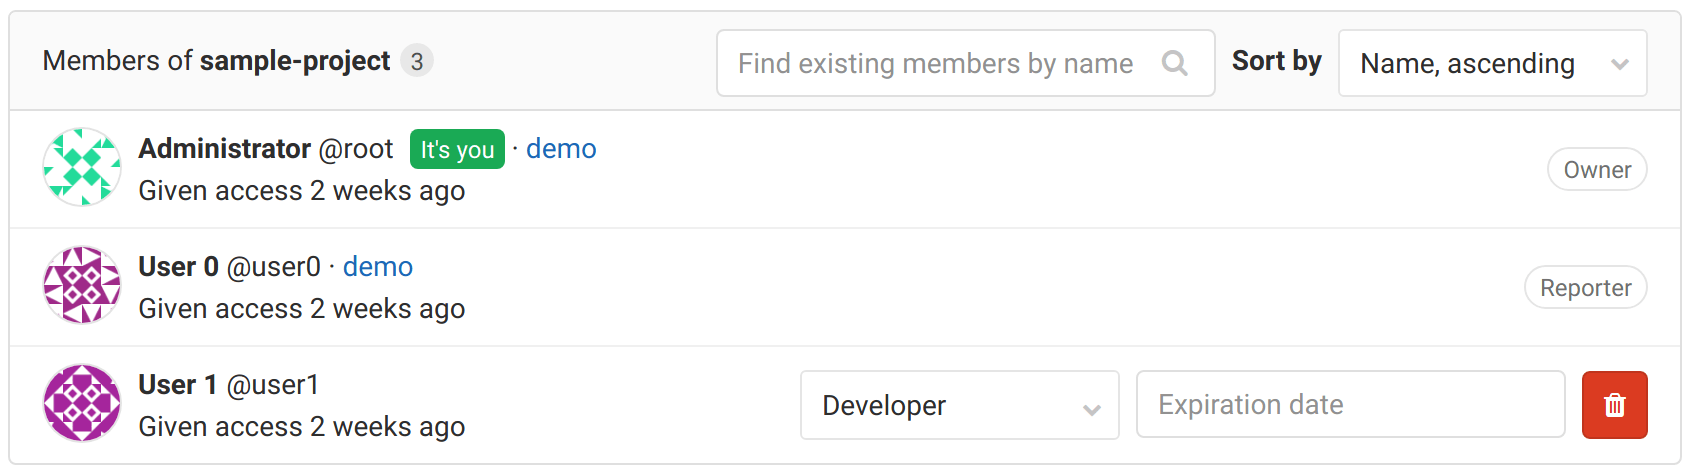 docs/img/project_members.png